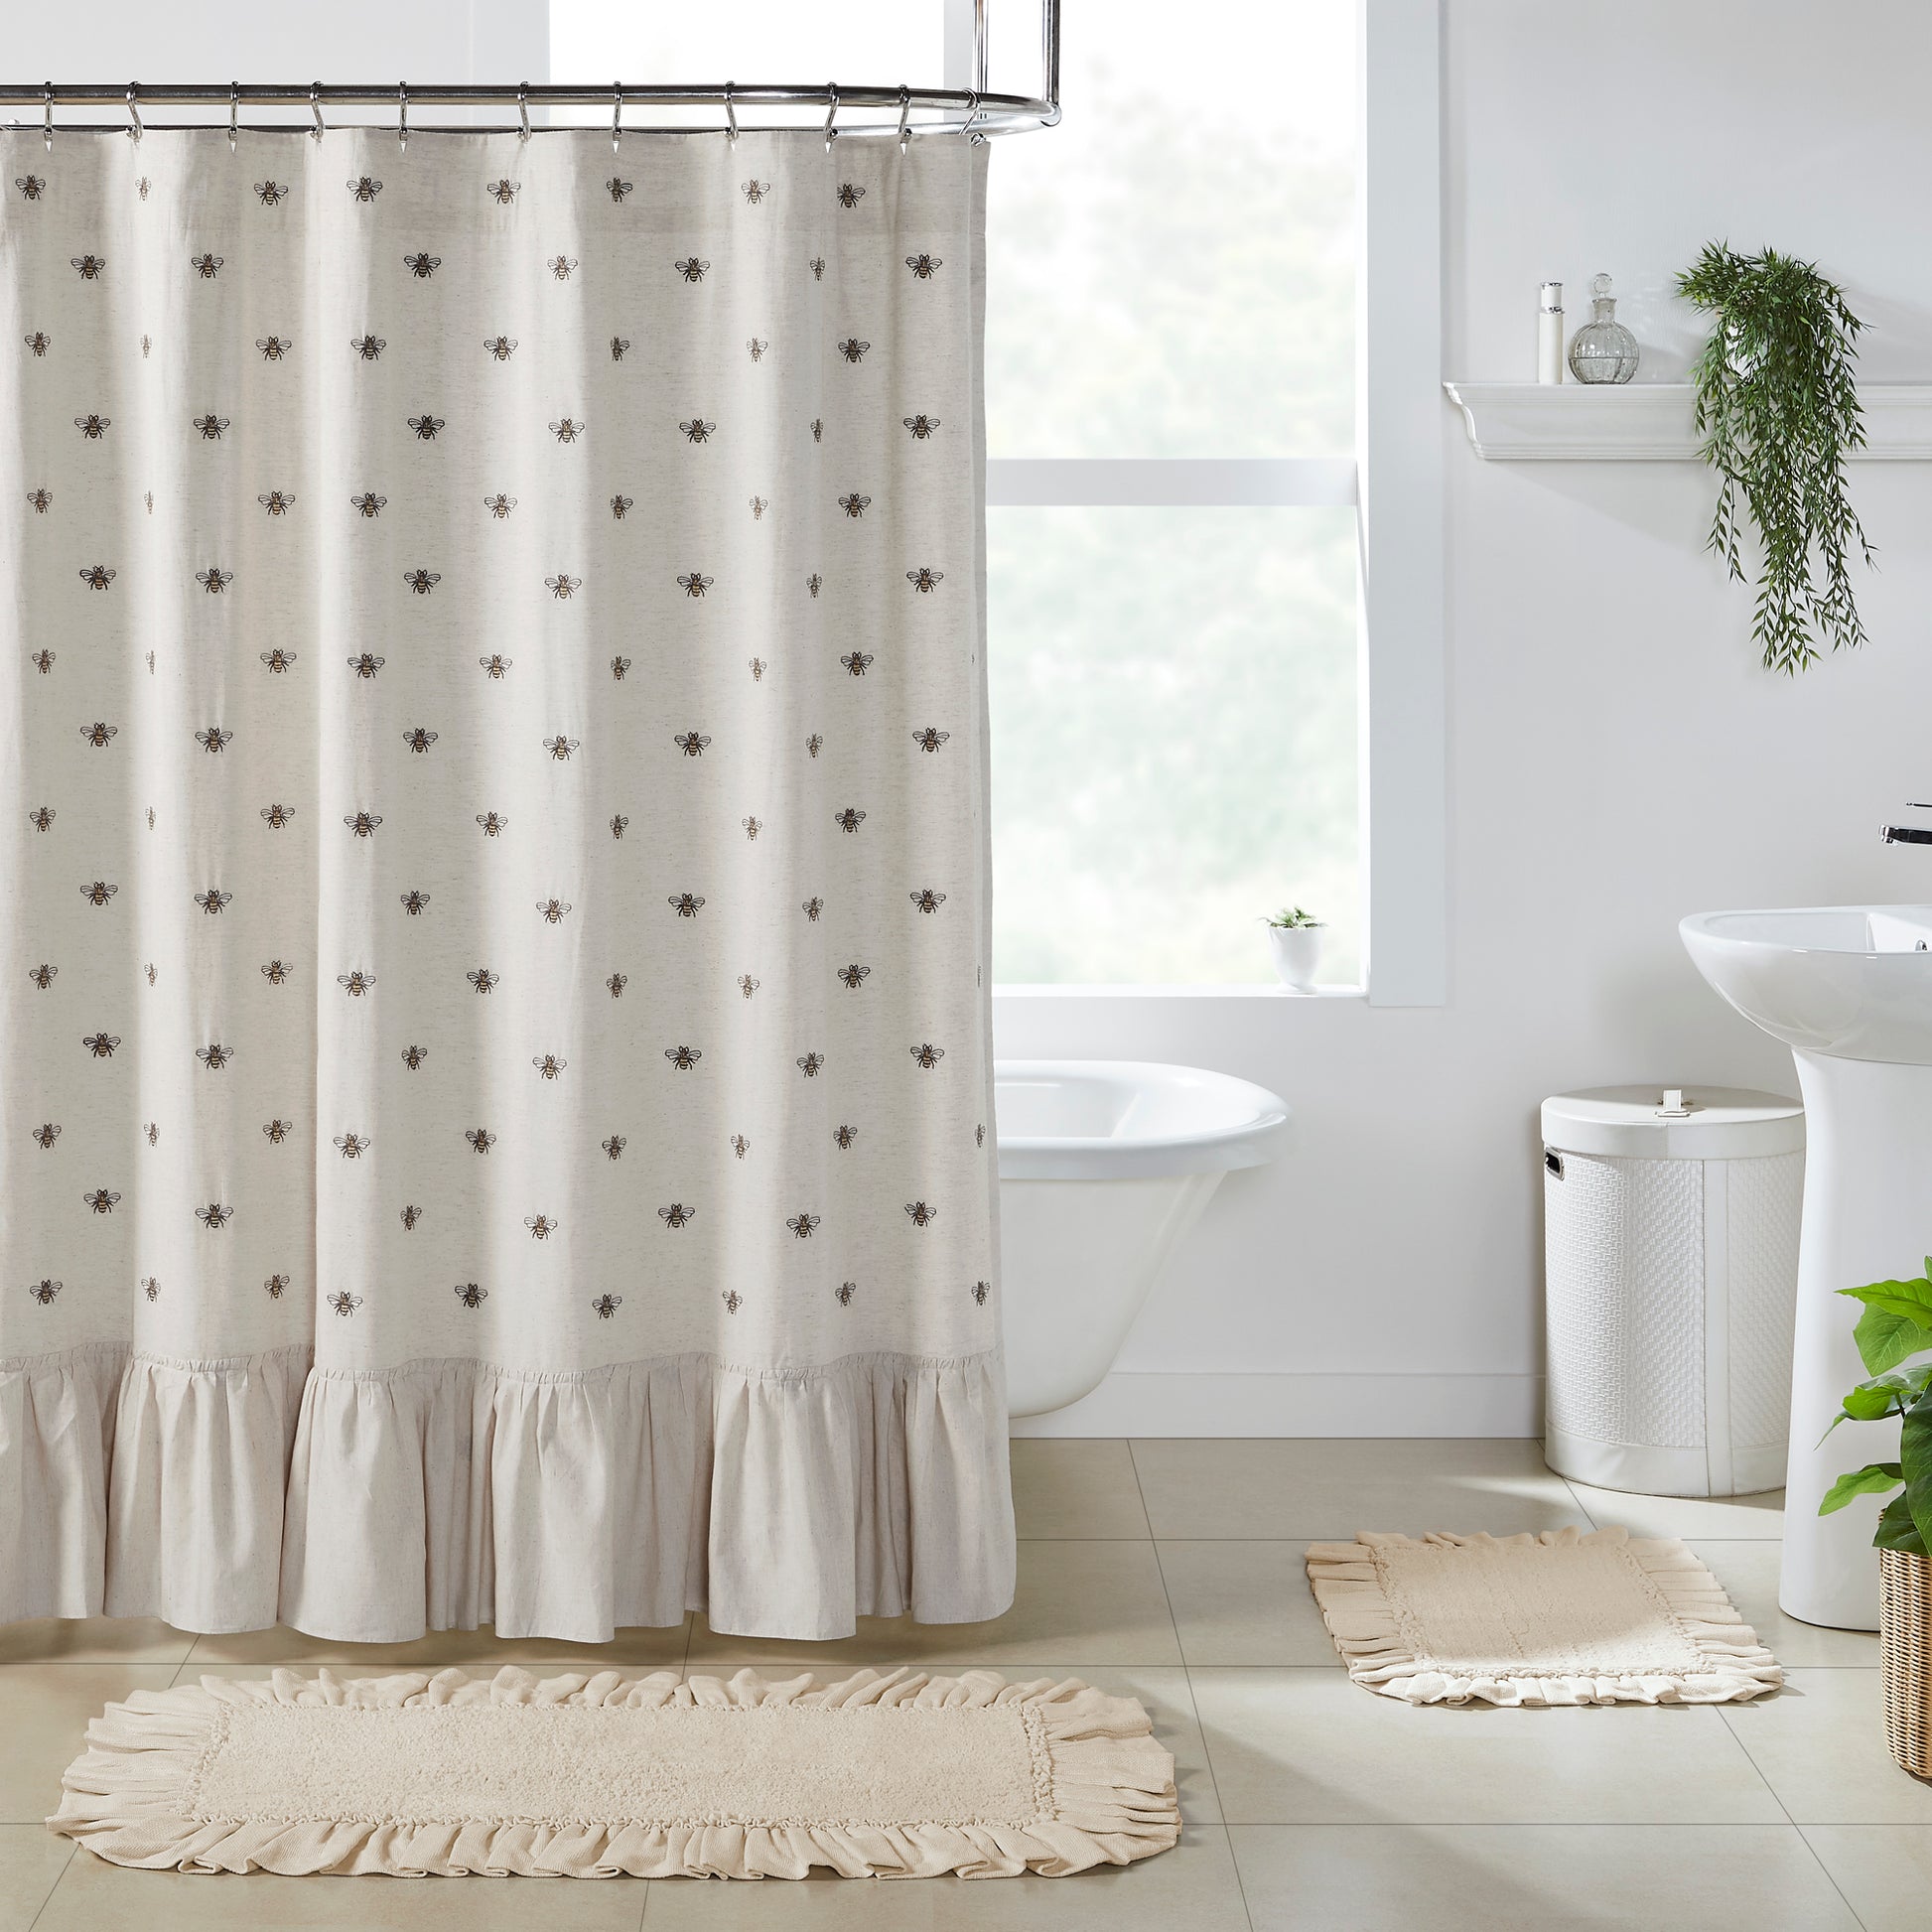 81266-Embroidered-Bee-Shower-Curtain-72x72-image-6